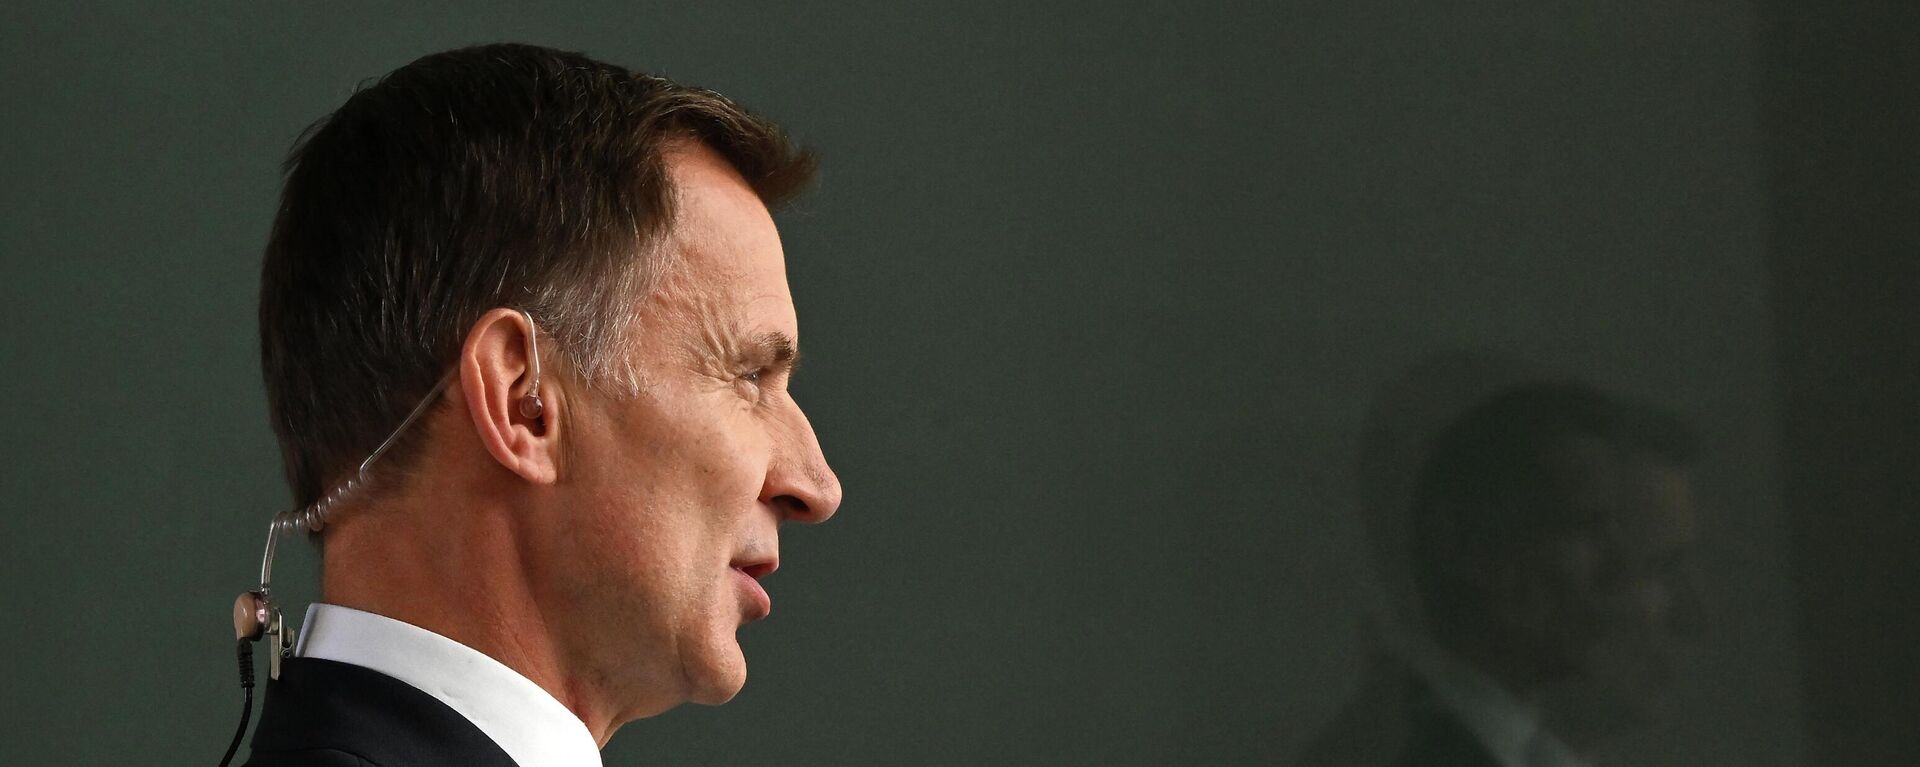 Conservative politician Jeremy Hunt gives an interview outside the BBC studios in central London on July 10, 2022, after appearing on the BBC's 'Sunday Morning' political television show with journalist Sophie Raworth.  - Sputnik International, 1920, 14.10.2022